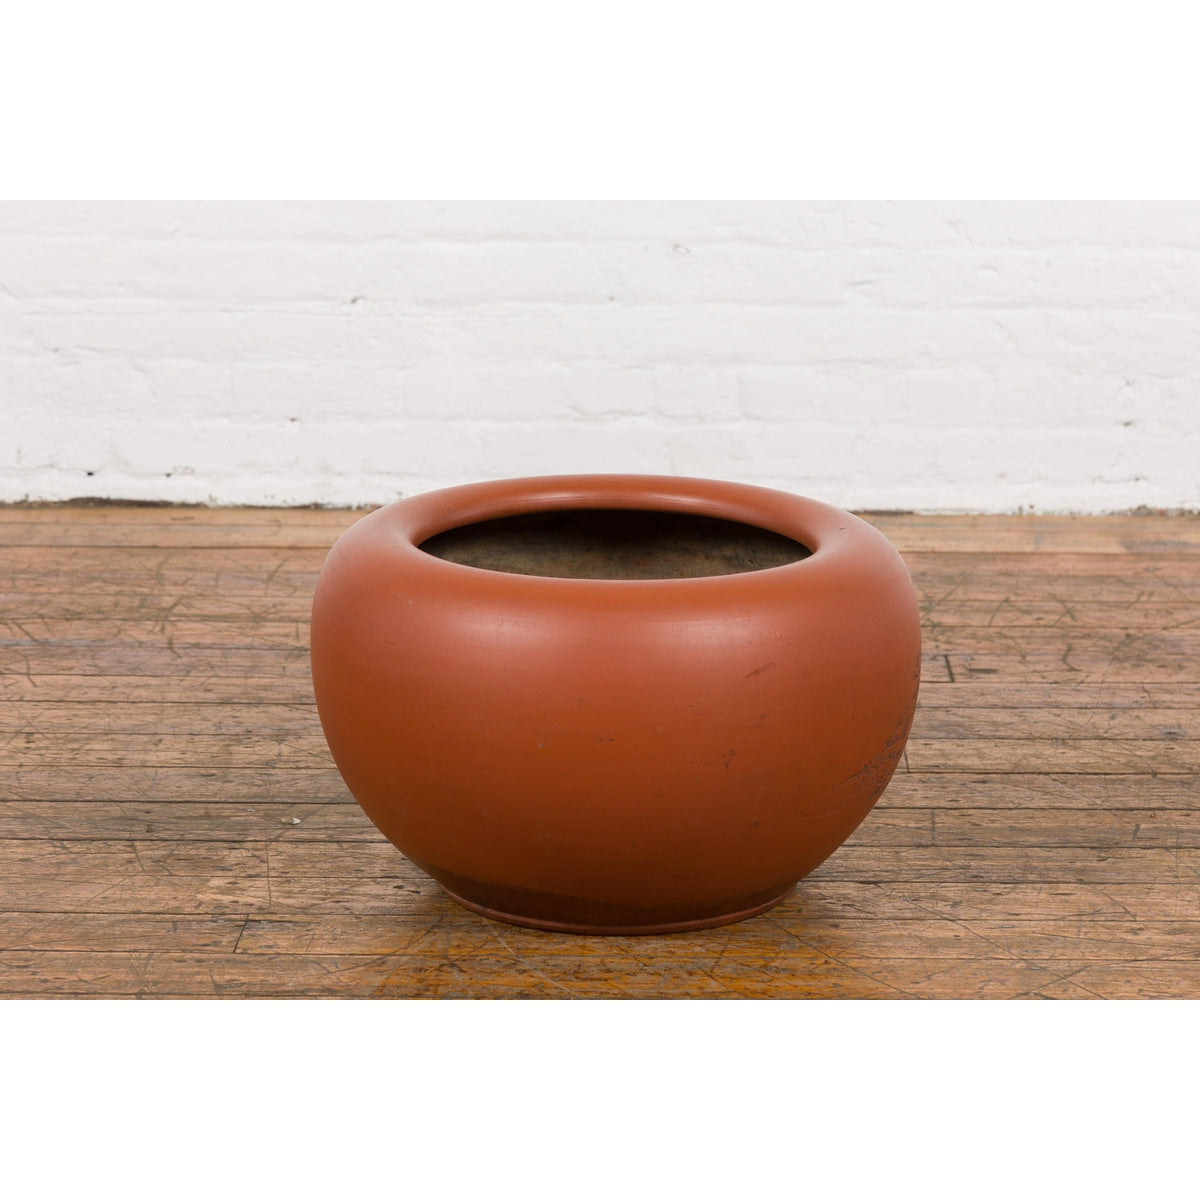 Orange Circular Antique Planter with Etched Design-YN7819-10. Asian & Chinese Furniture, Art, Antiques, Vintage Home Décor for sale at FEA Home